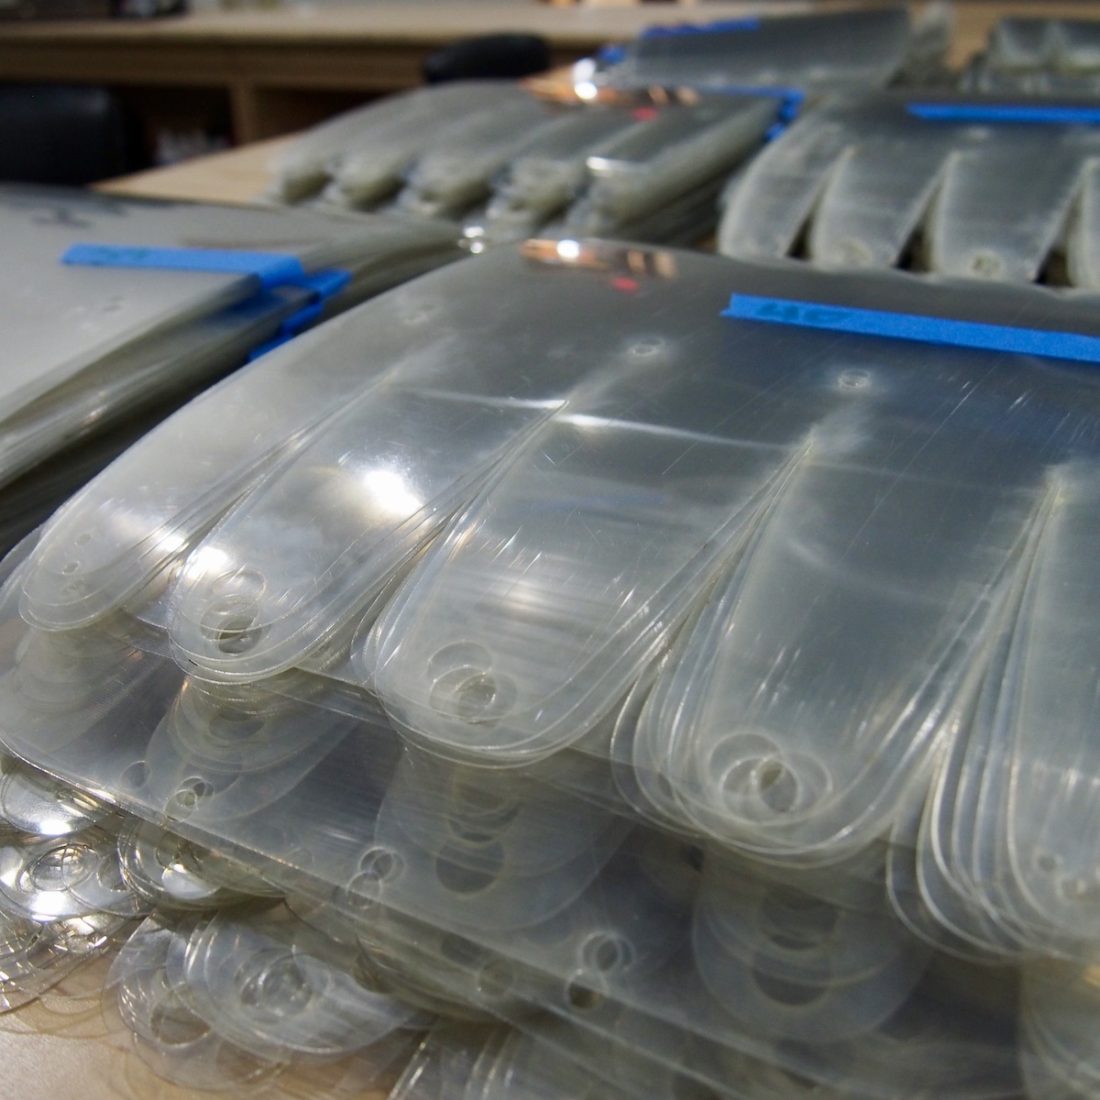 Piles of laser cut face shields waiting for assembly by our team.